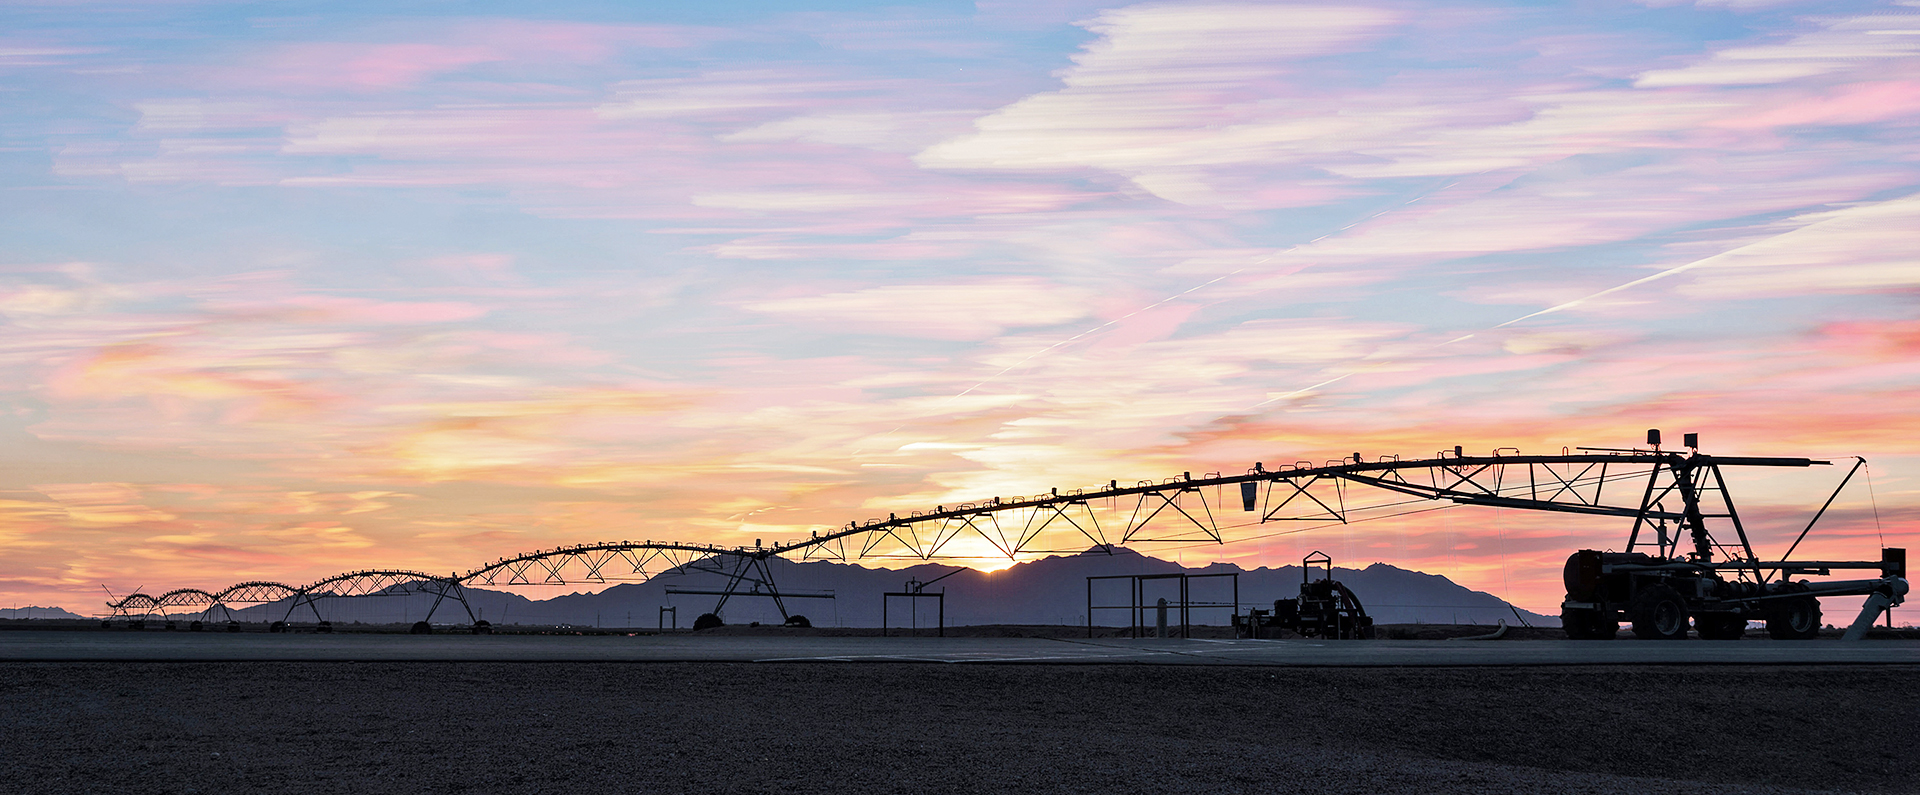 Sunset over lateral-move overhead irrigation system and the Estrella mountain southwest of Phoenix, Arizona.